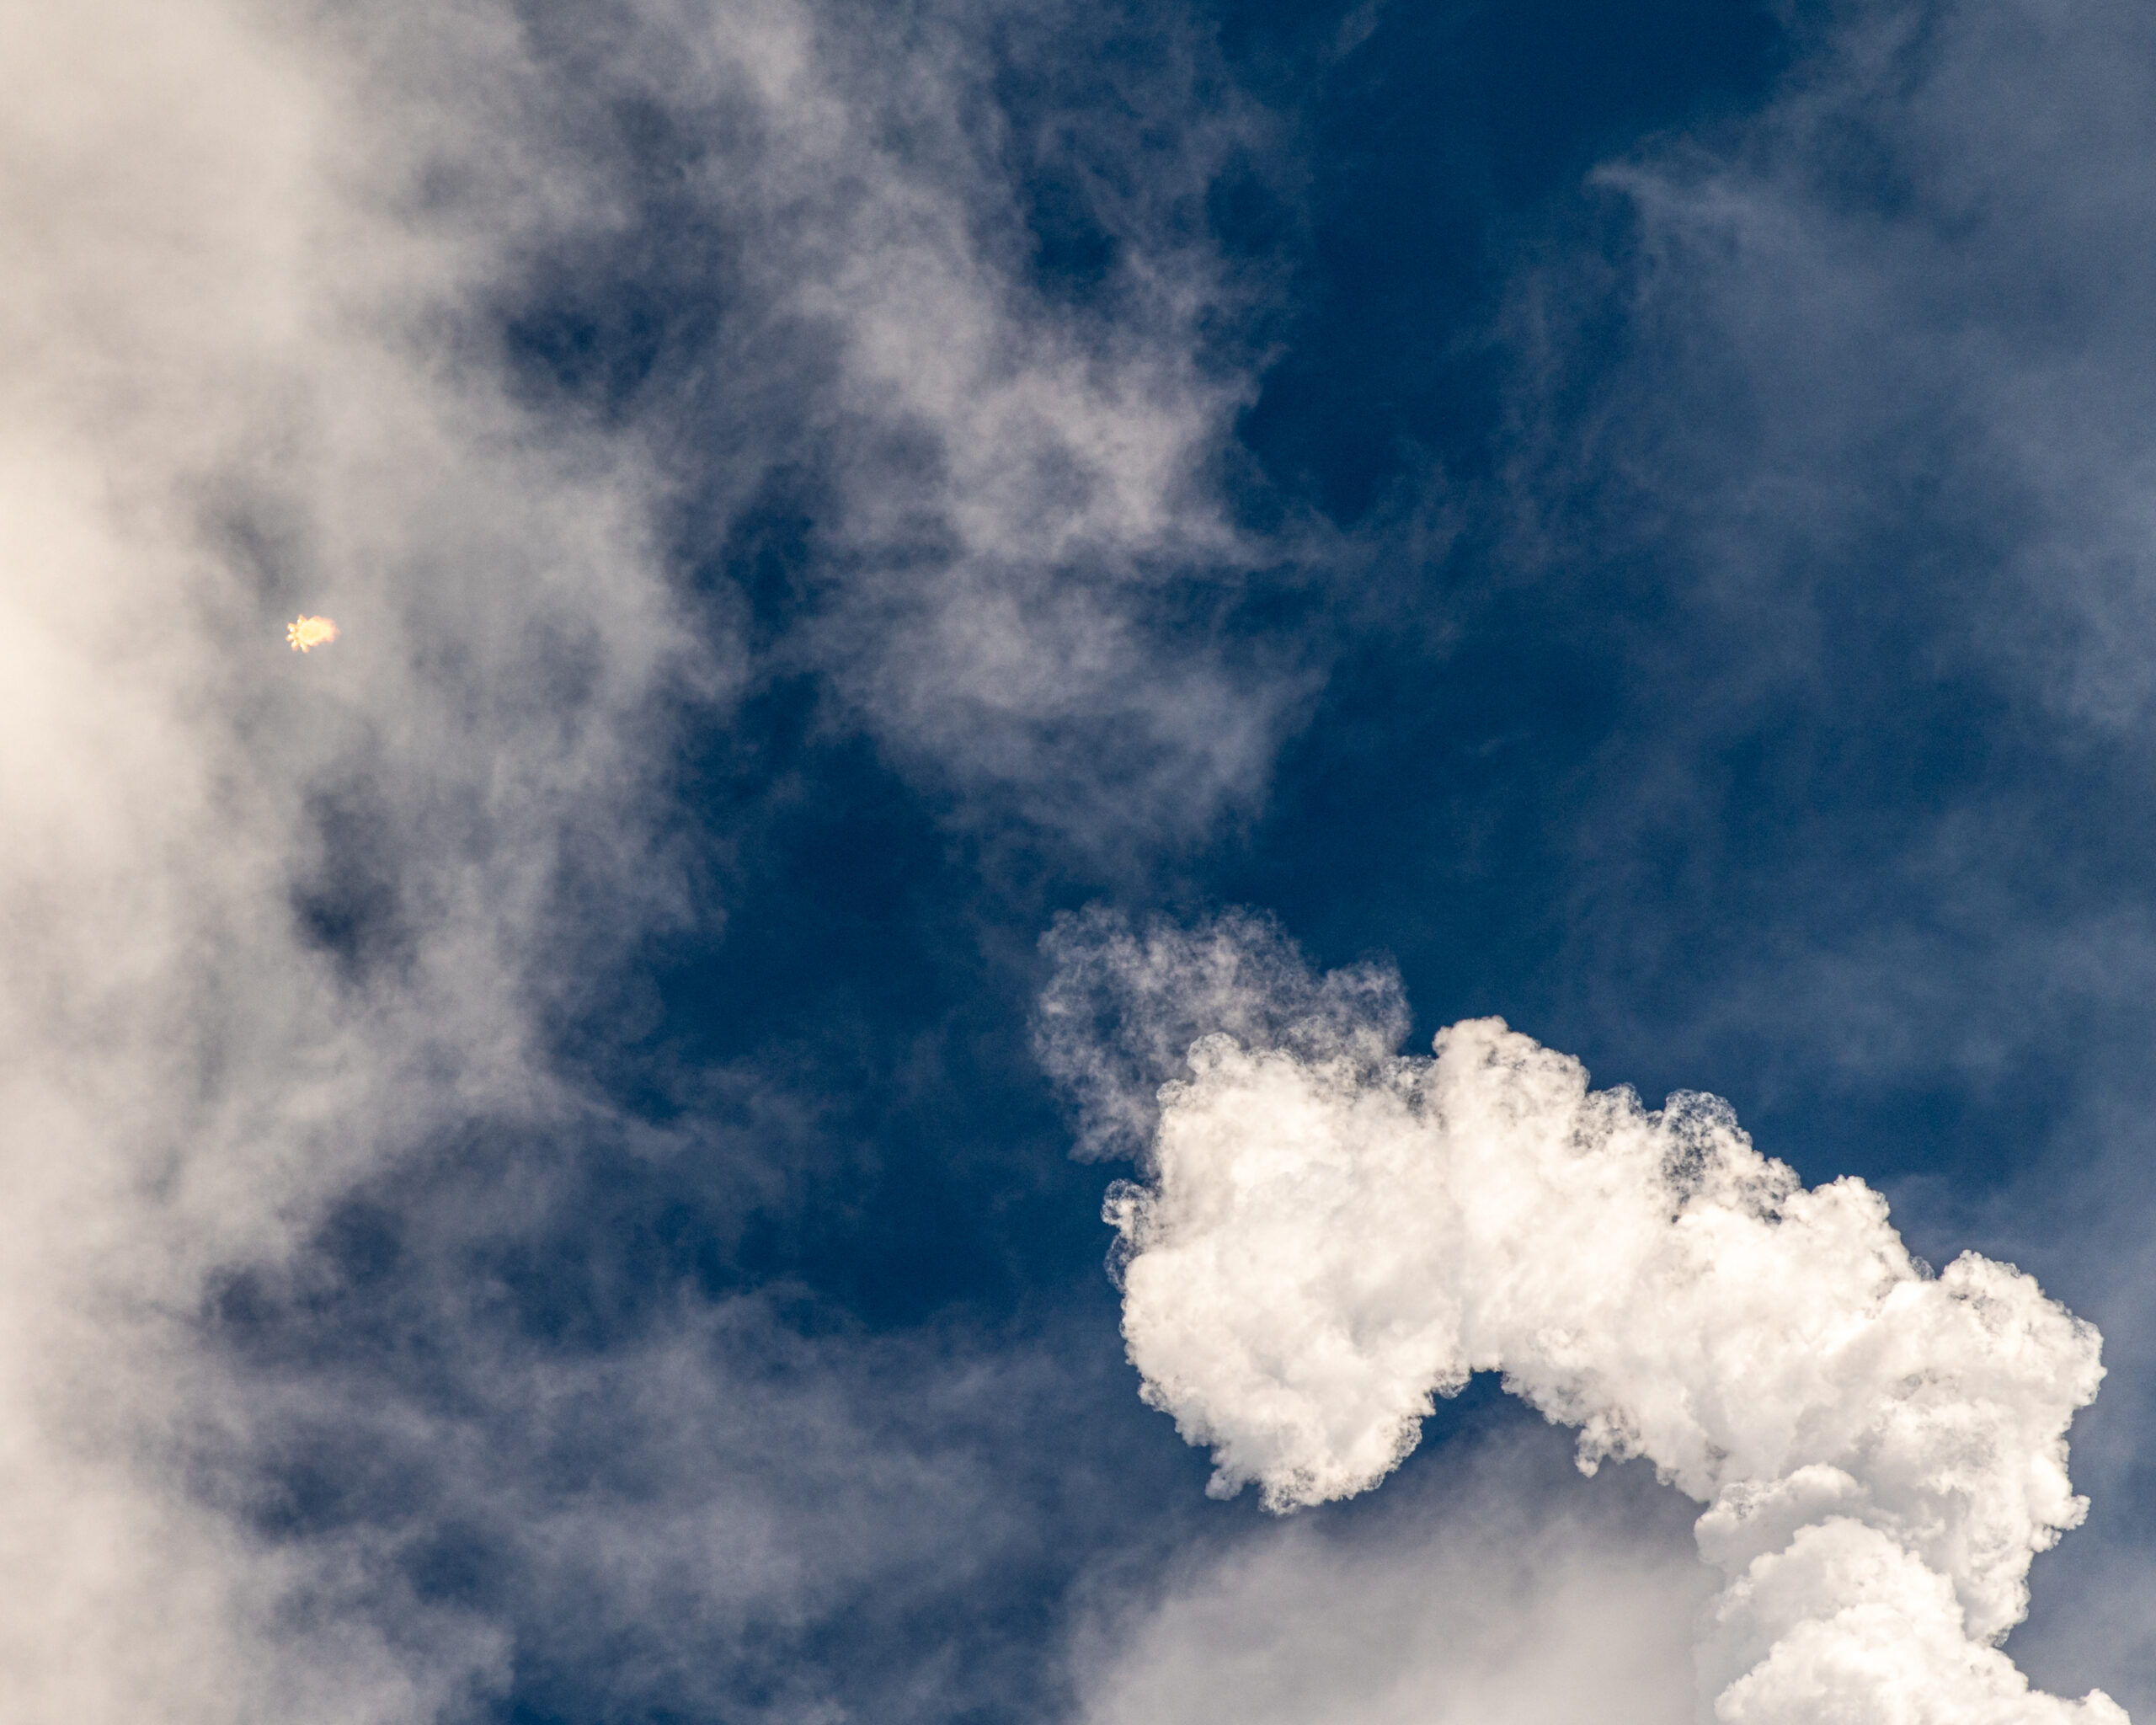 Clouds and the vapor plume left by Falcon 9 as Crew-5 is pitching downrange.